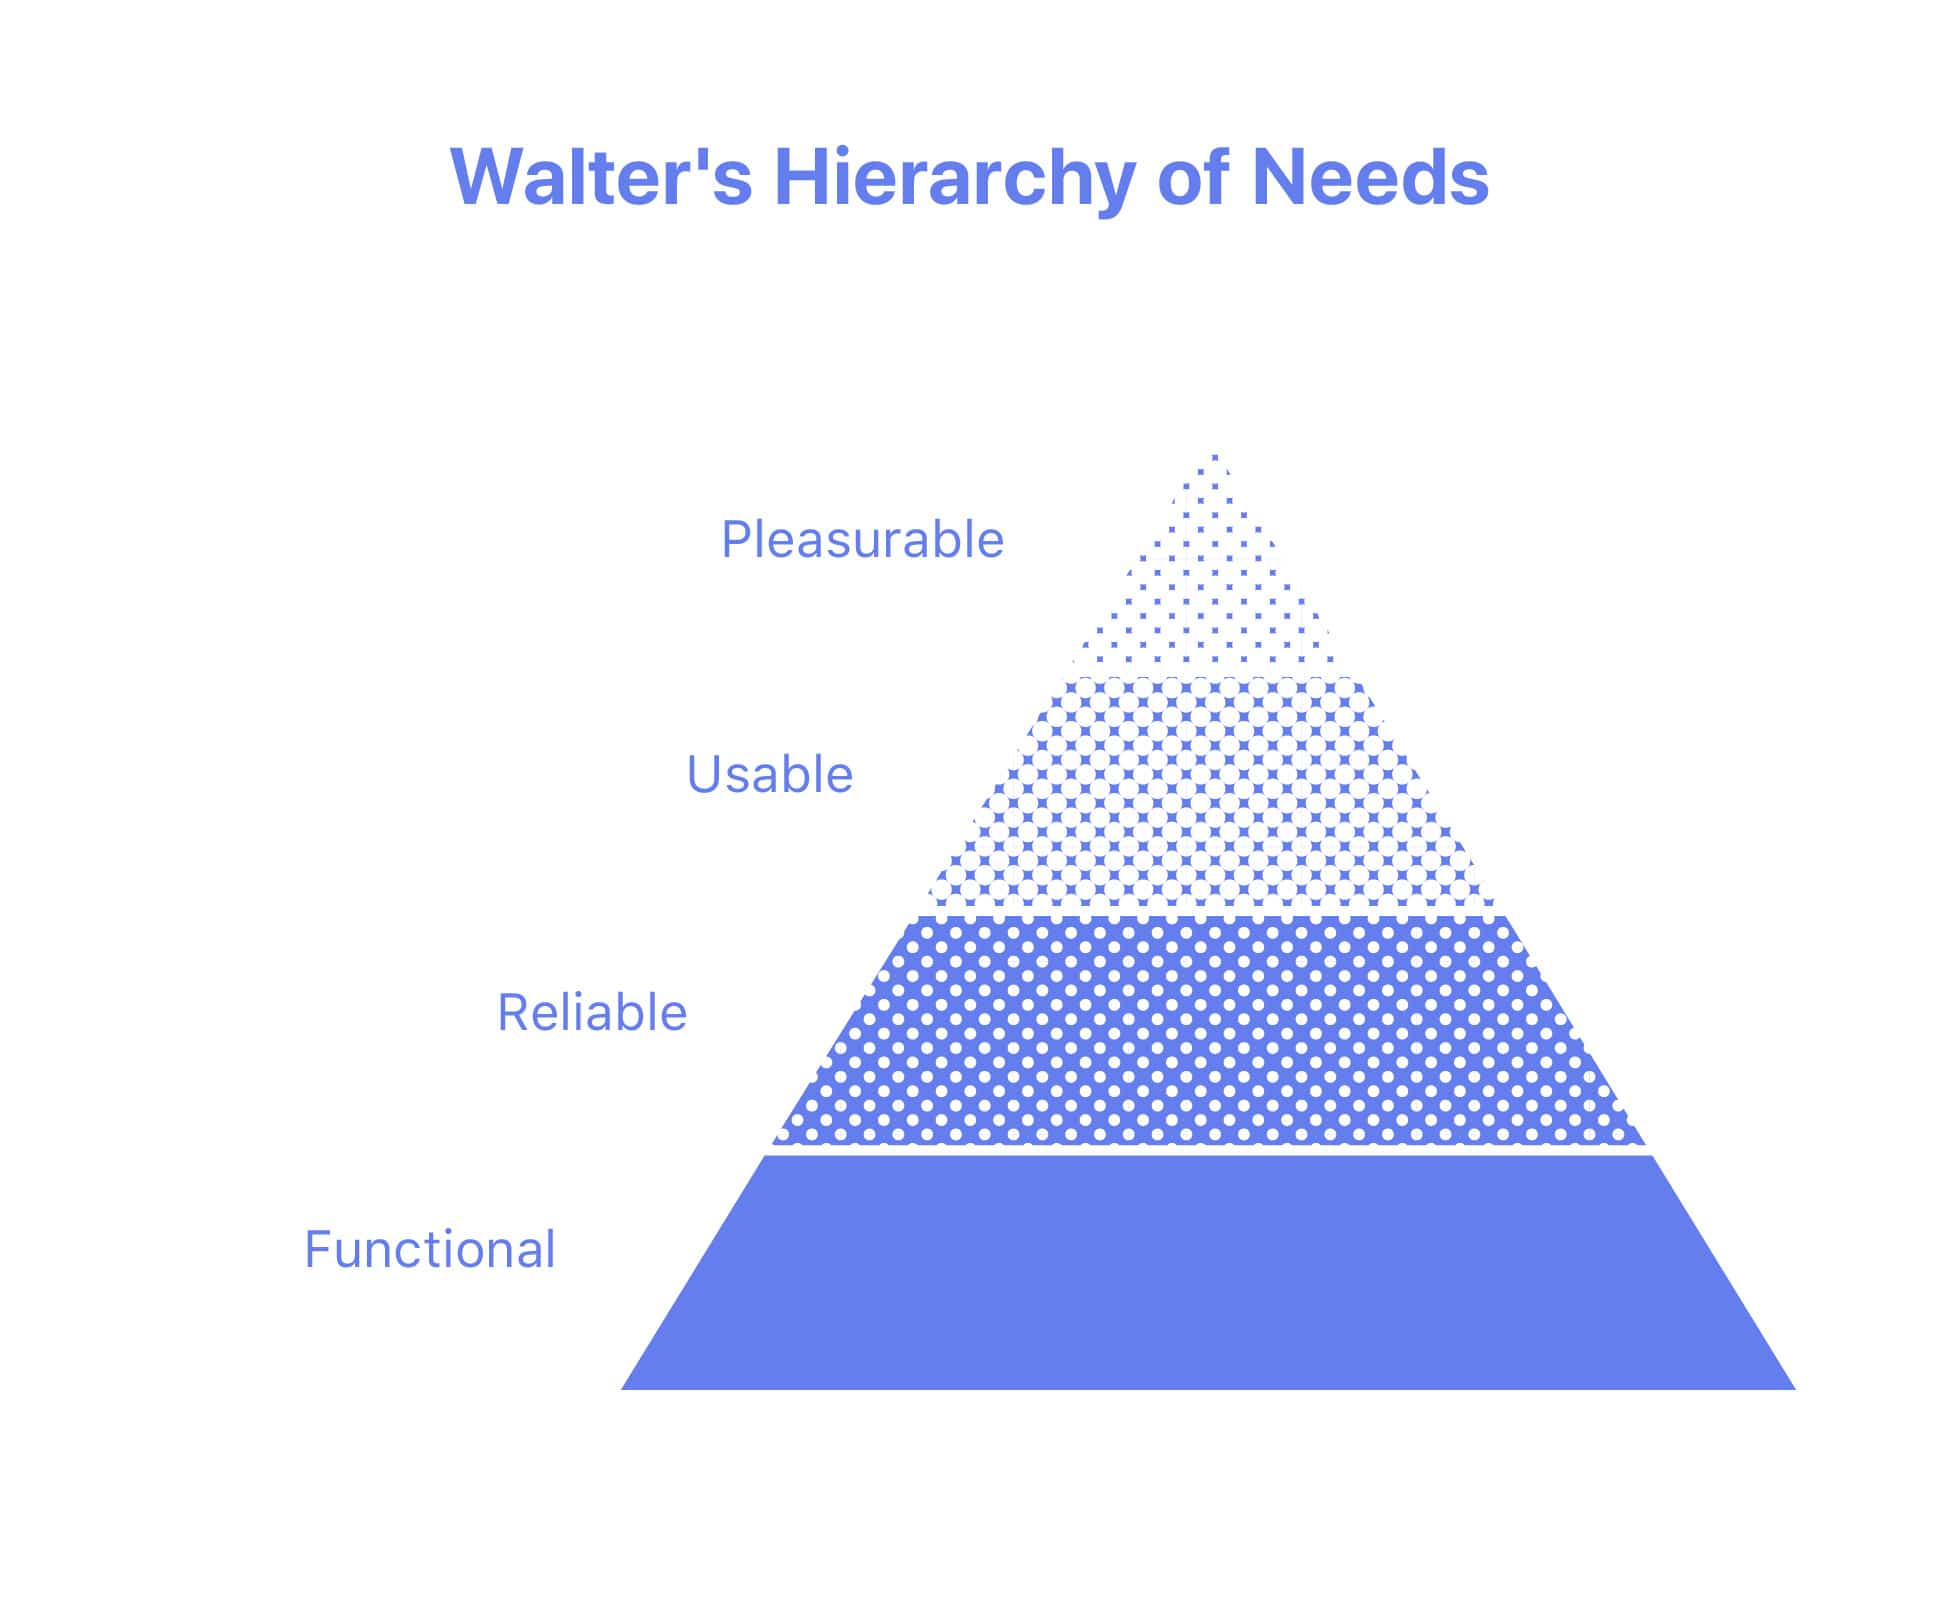 Walter’s Hierarchy of Needs